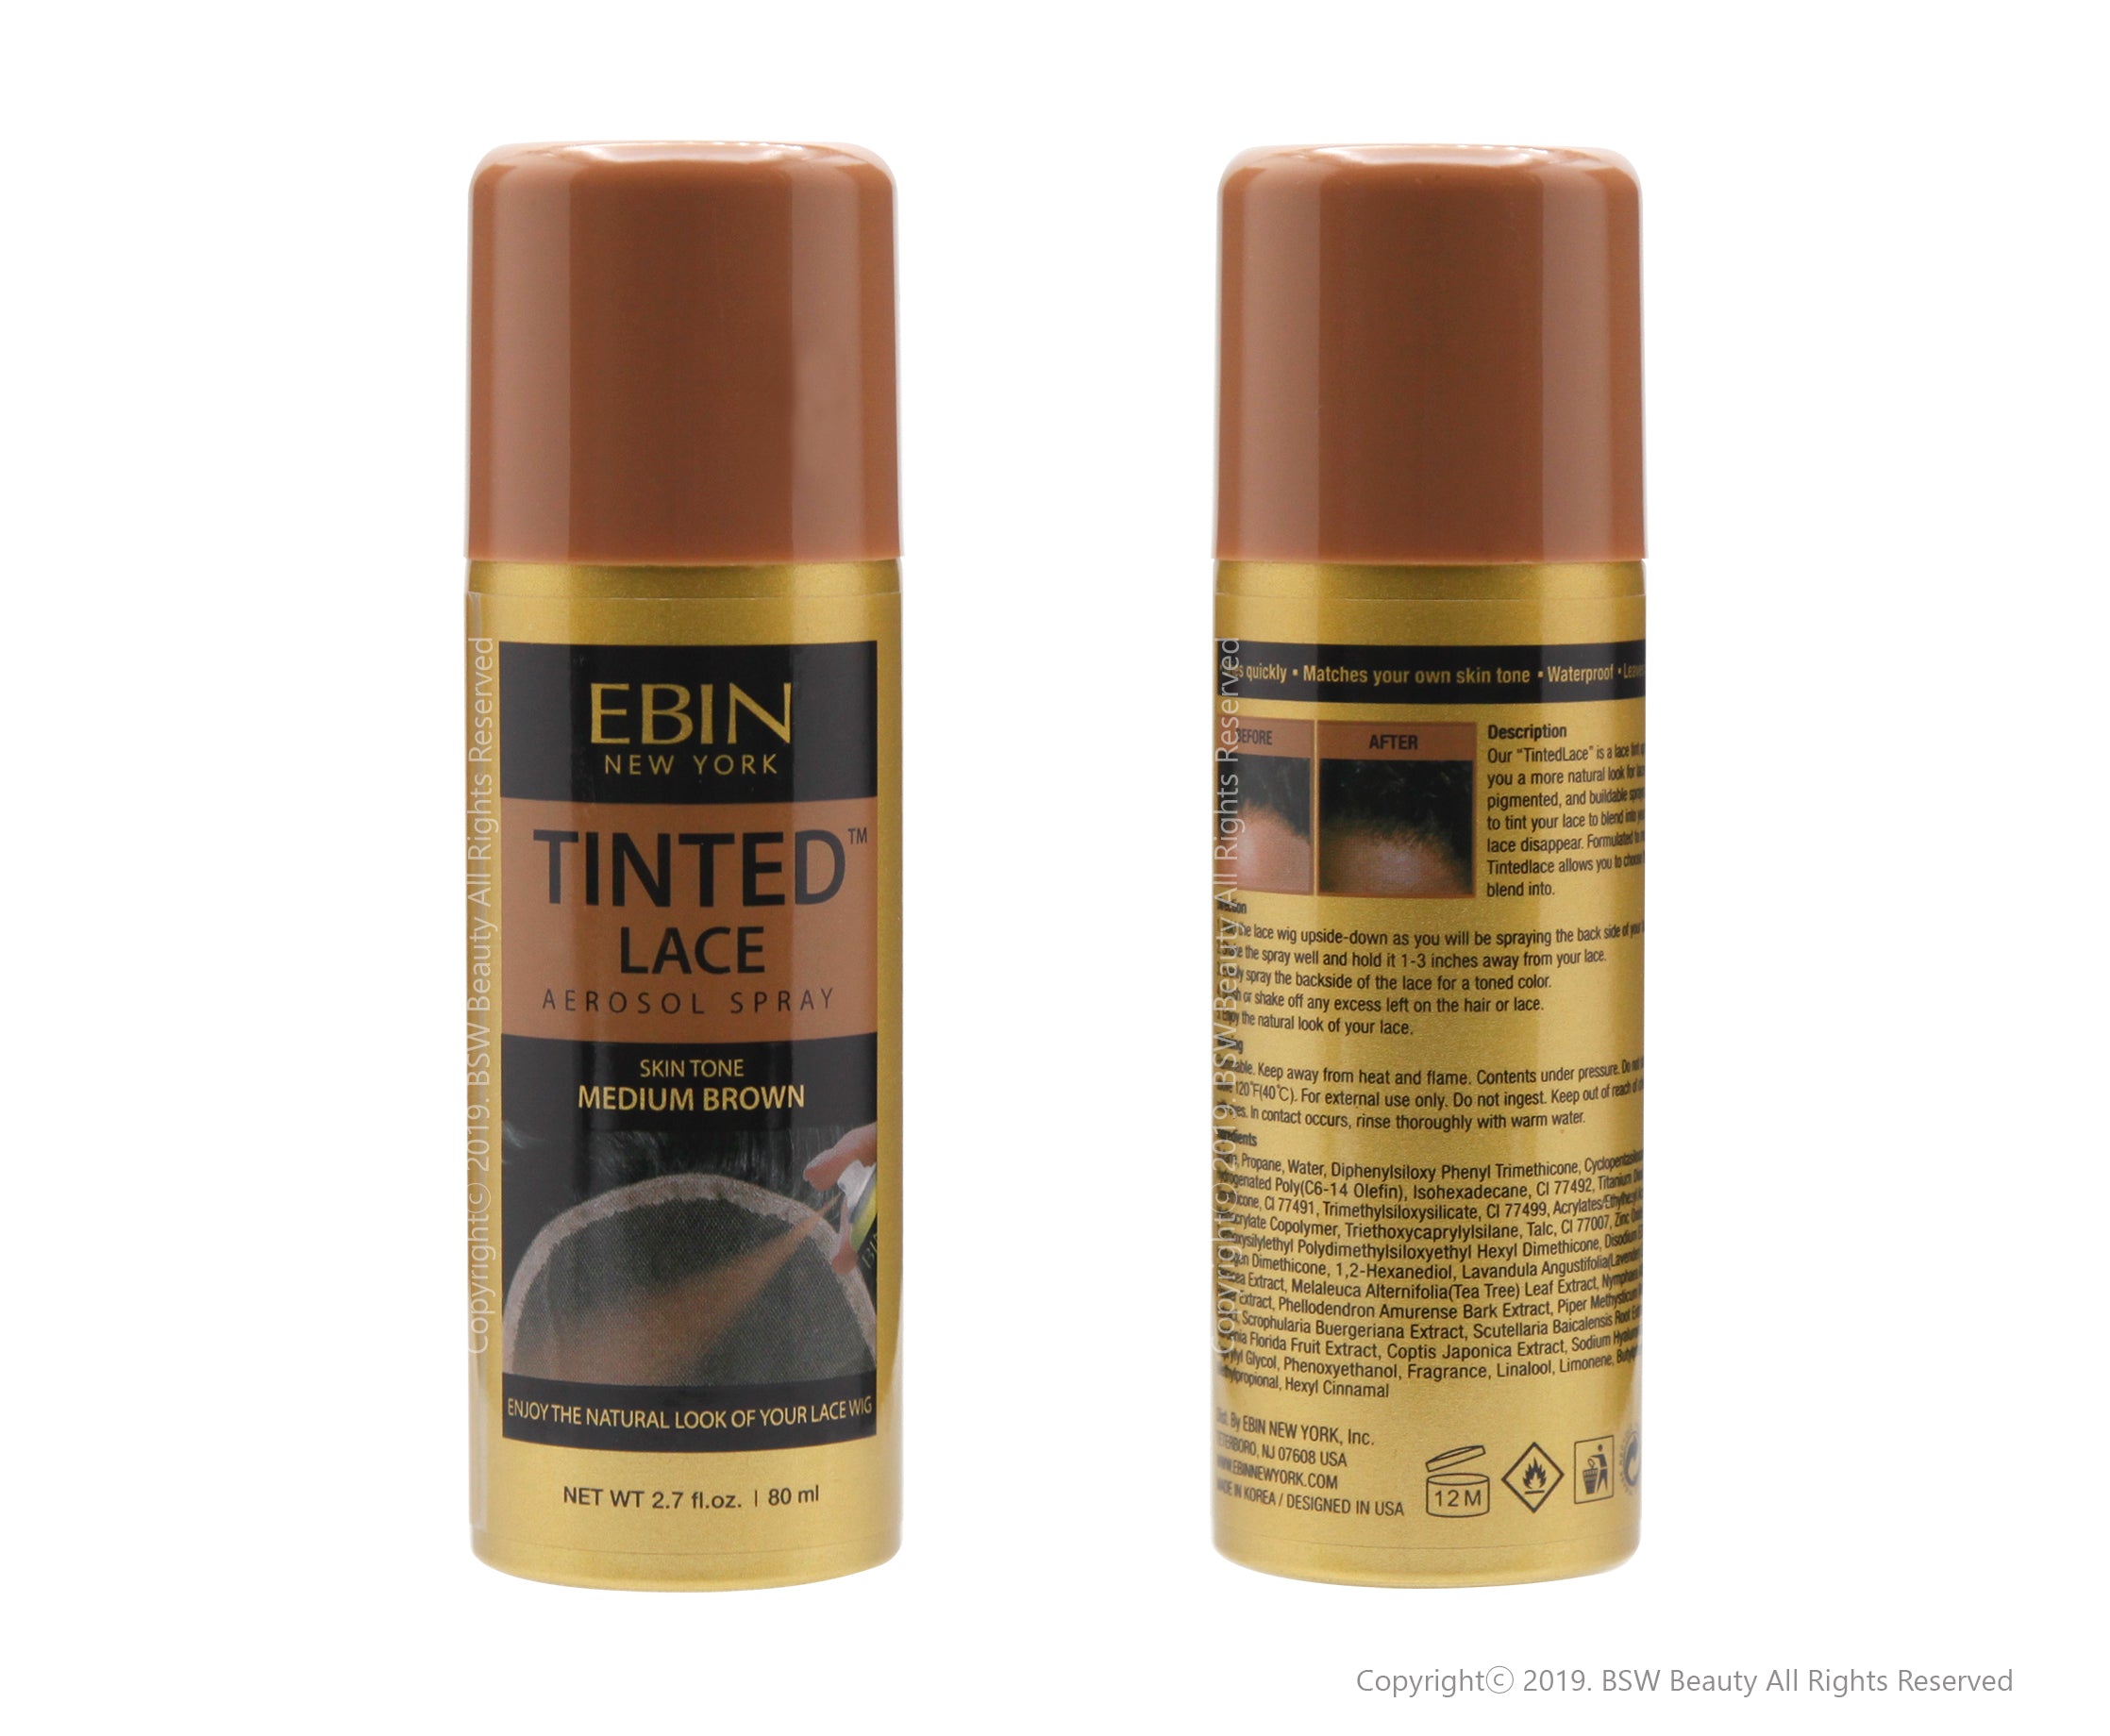 Ebin New York Tinted Lace Mousse 3.38oz - Light Warm Brown